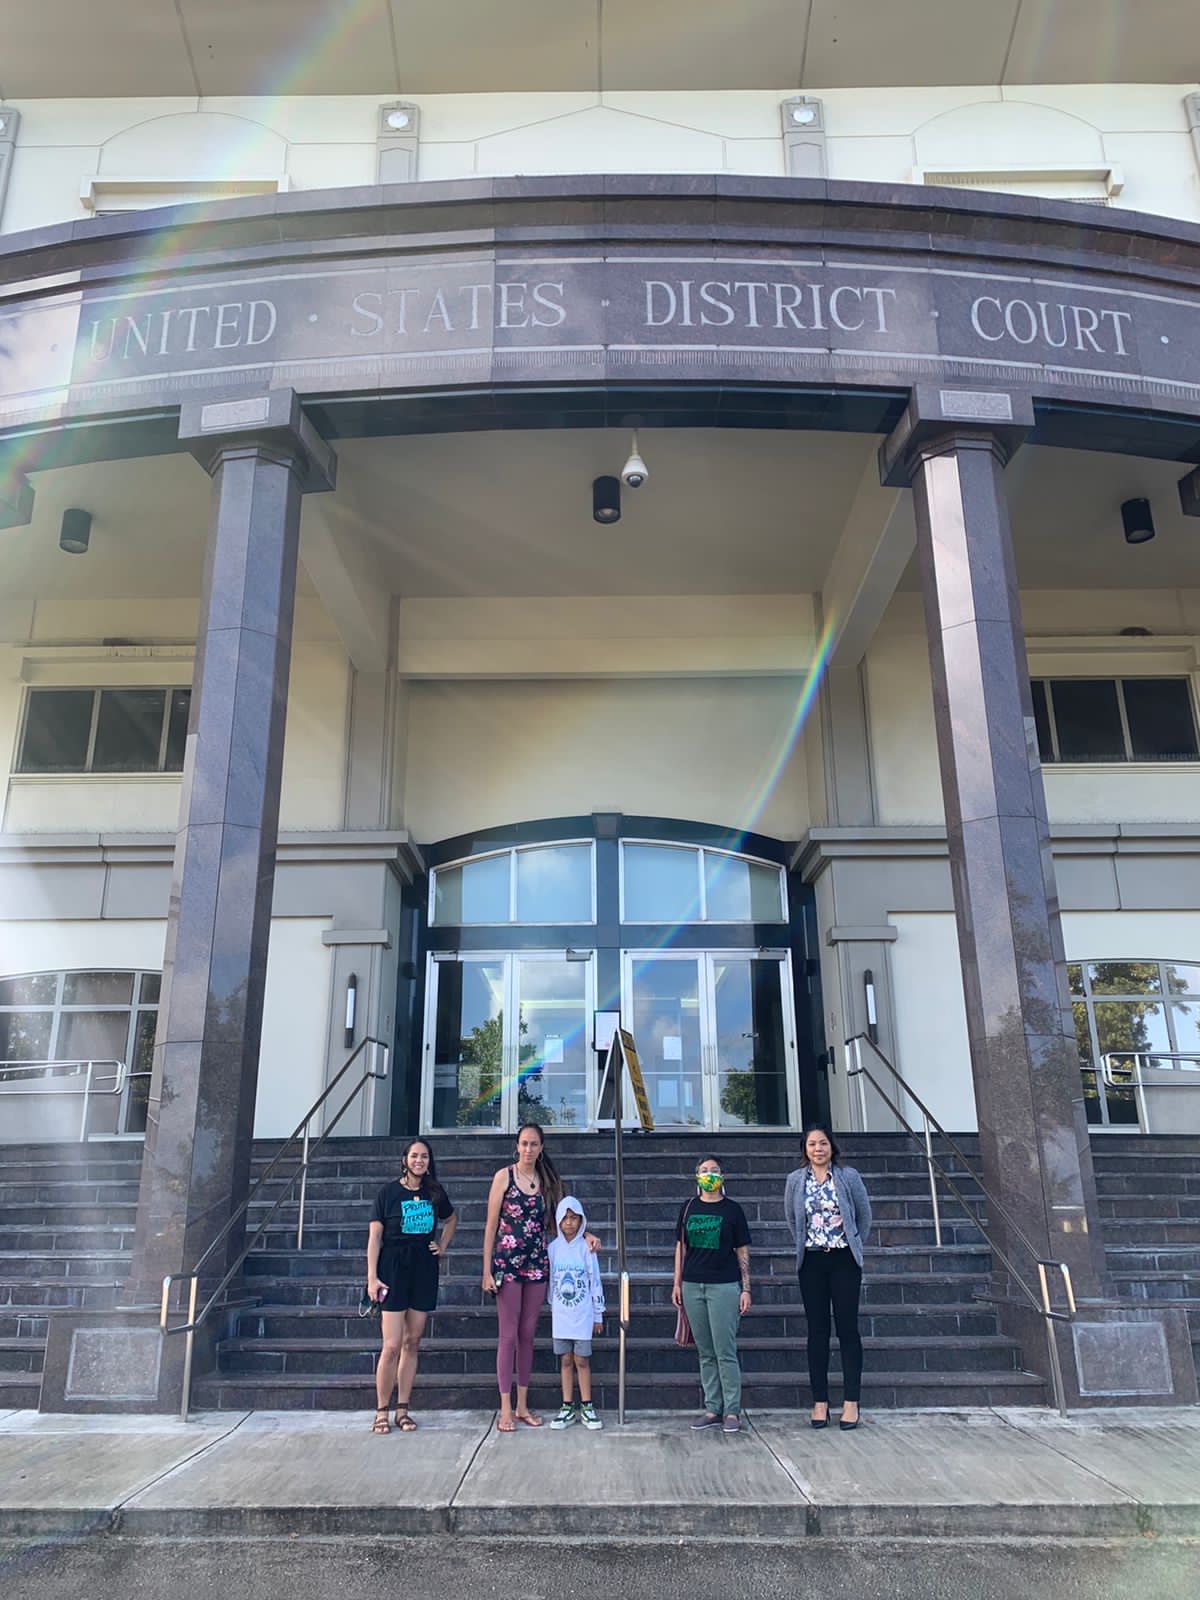 Five people stand in front of a building with the words "United States District Court" above